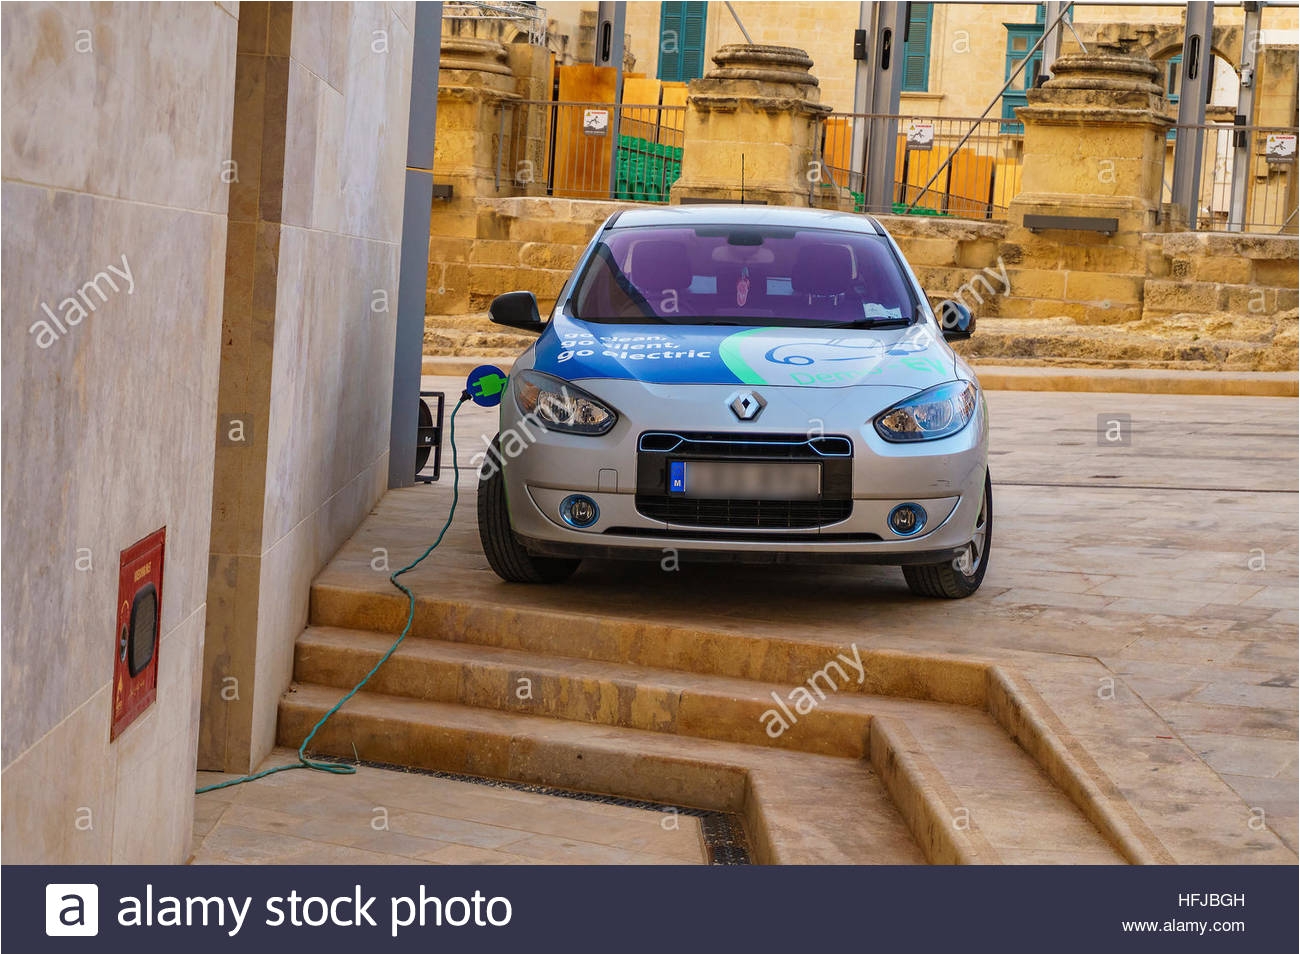 renault fluence z e charging behind the new energy efficient parliament building of malta in valetta